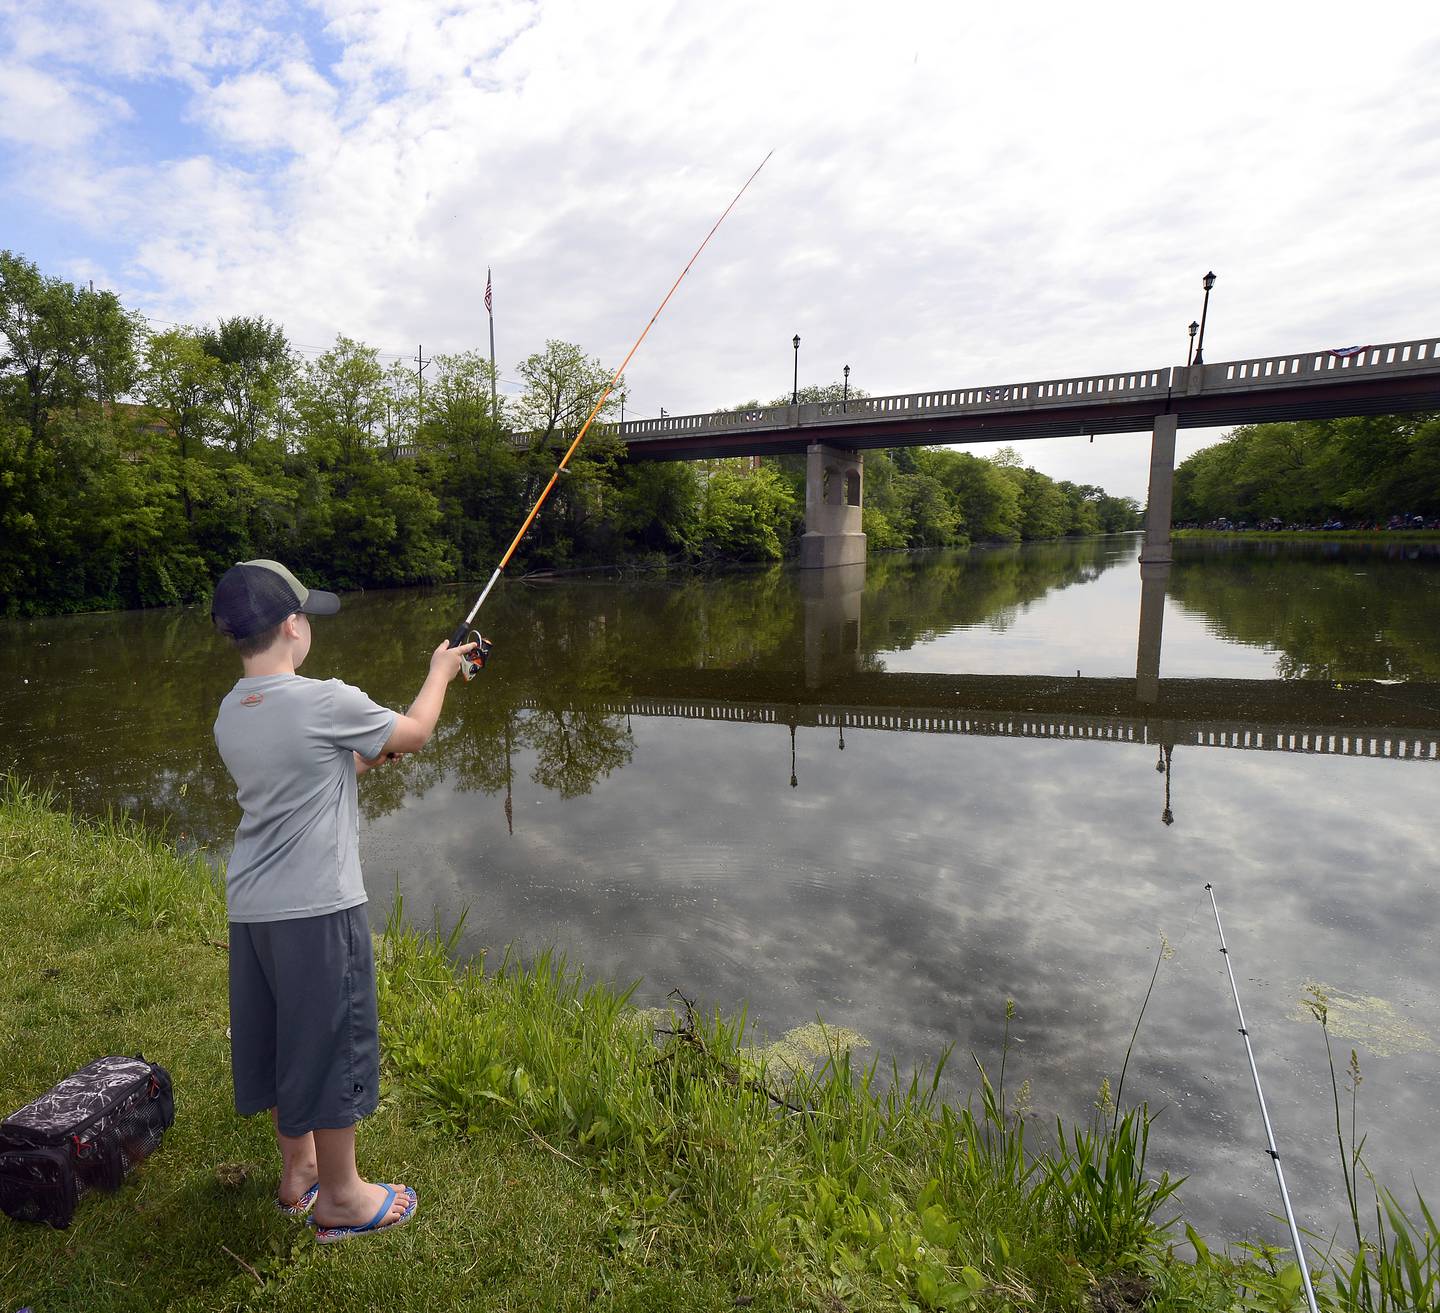 Landon Gleason finds a picturesque spot to try his luck Saturday, June 4, 2022, during the Kids Fishing Tournament at Lock 14 in La Salle.